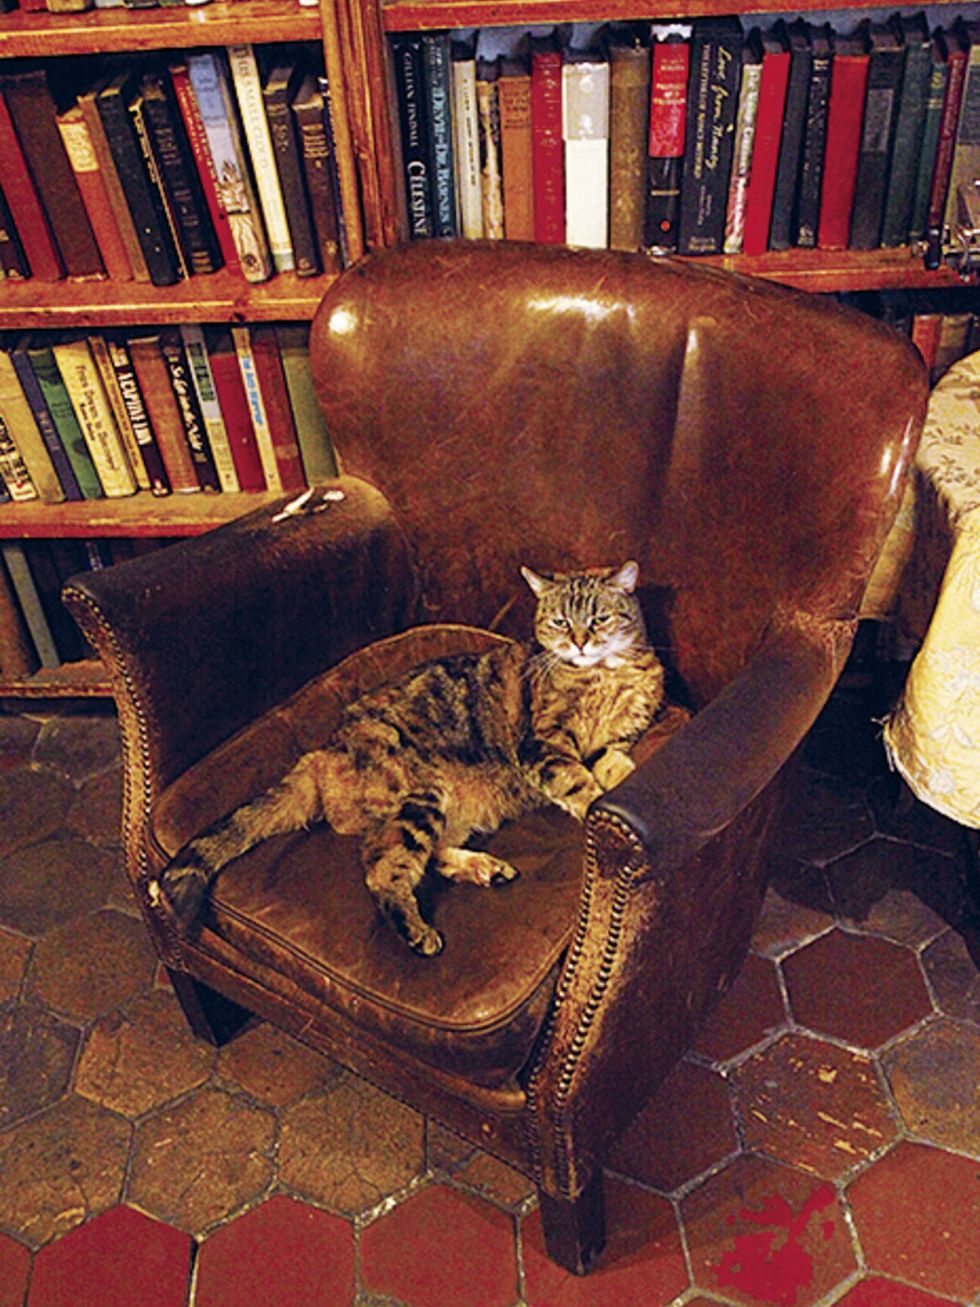 Chair, Cat, Furniture, Small to medium-sized cats, Felidae, Room, Bookcase, Interior design, Couch, Book, 